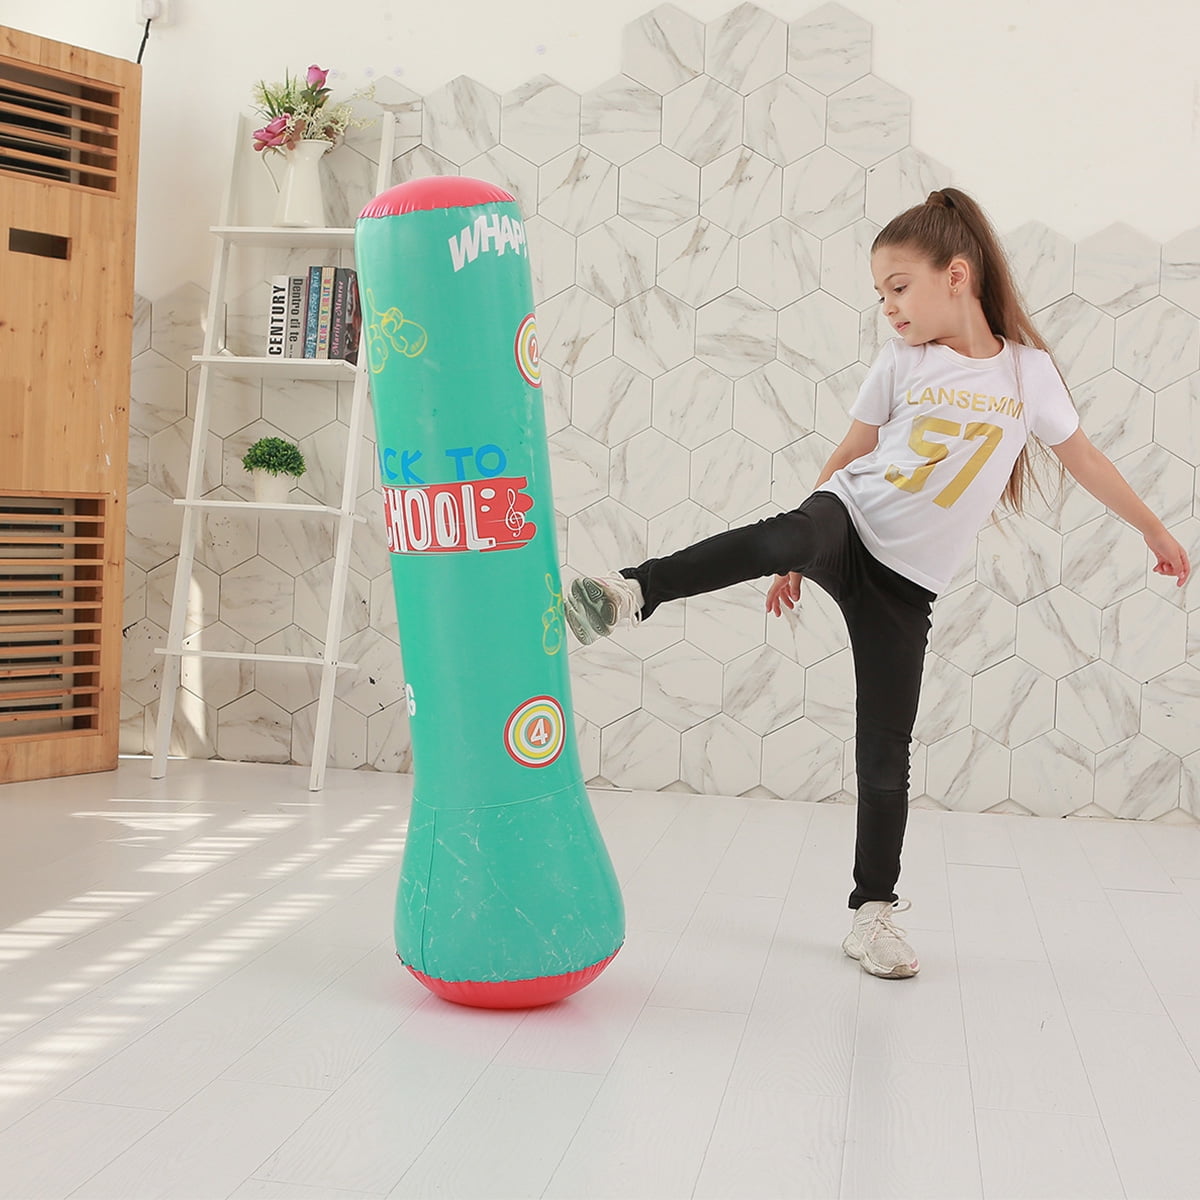 Big Time Toys 22999 Socker Bopper Power Standing Inflatable Punching Bag for sale online 